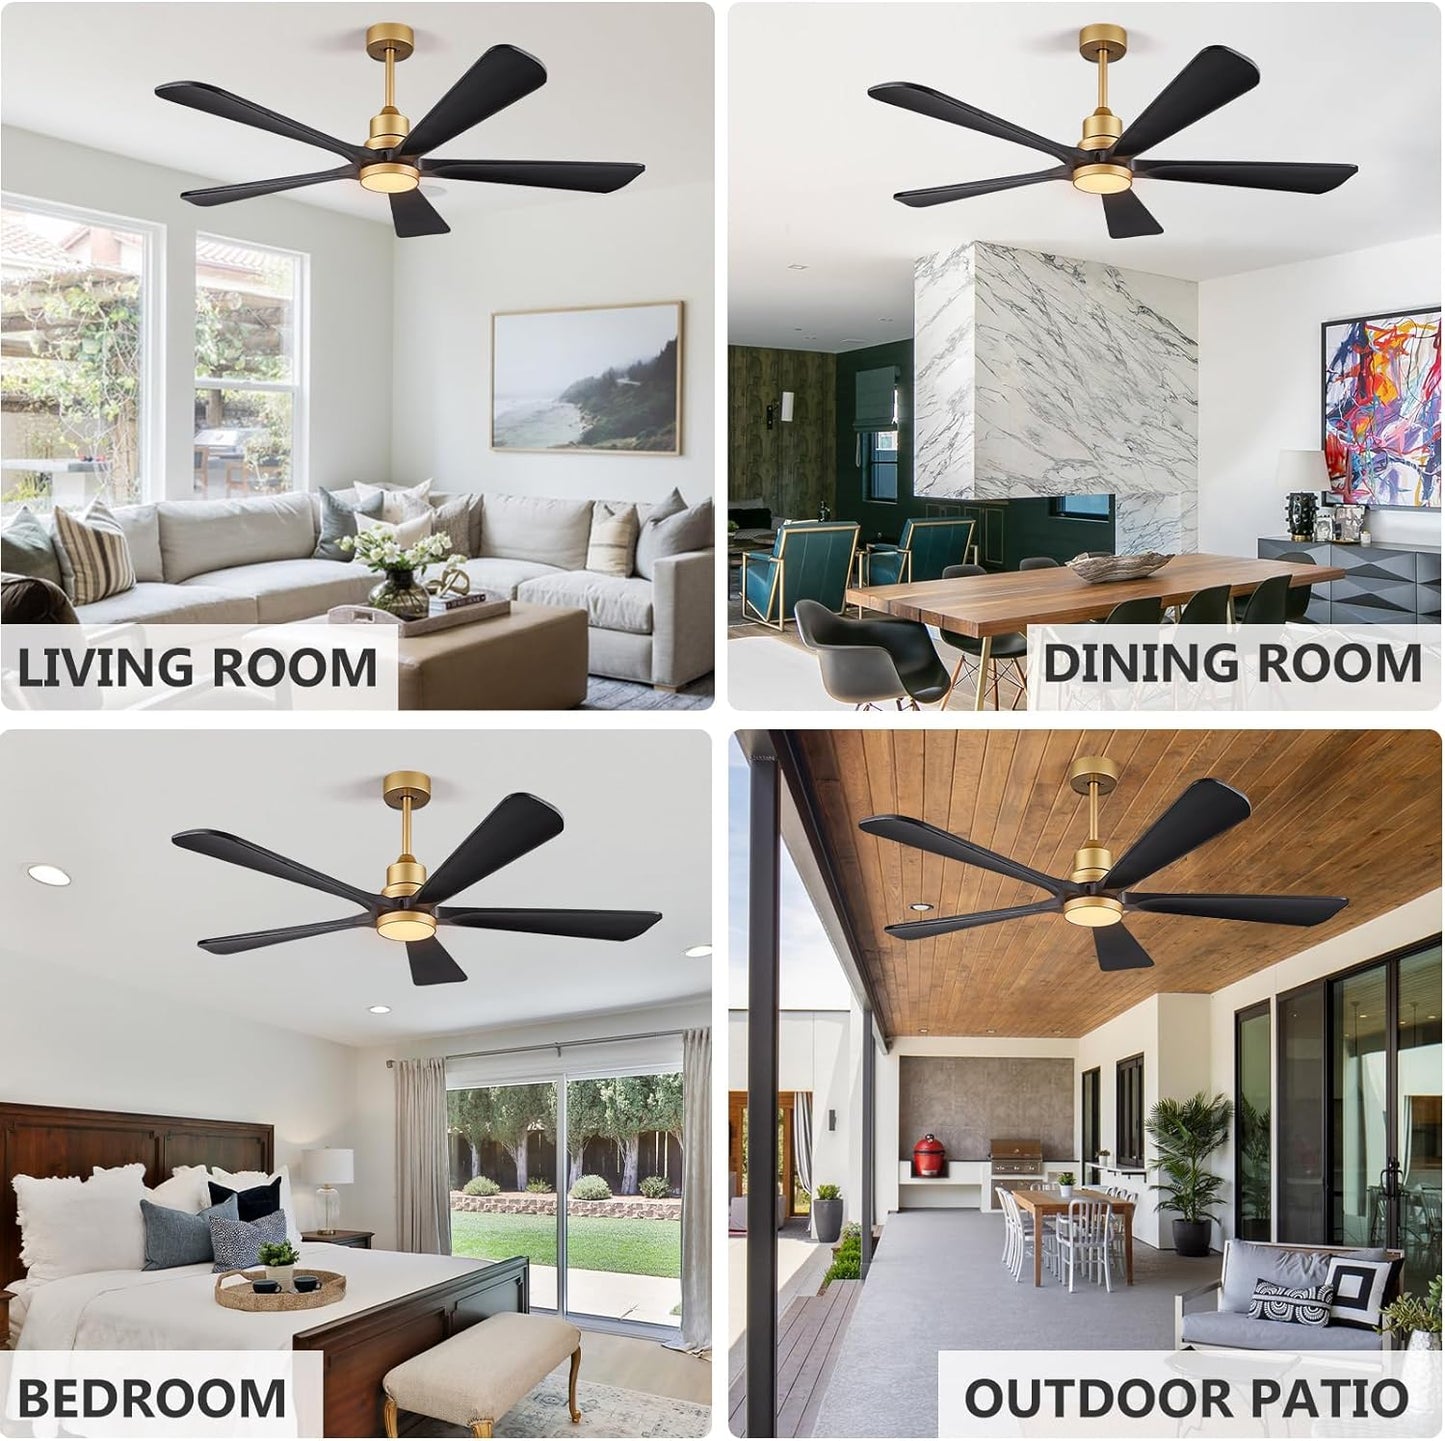 Ceiling Fans with Lights Remote Control - 52 inch Modern Ceiling Fan with Light 5 Black Wood Blades, Reversible Motor for Indoor/Outdoor Patio, Bedroom, Living Room, Farmhouse (52 INCH, Black)